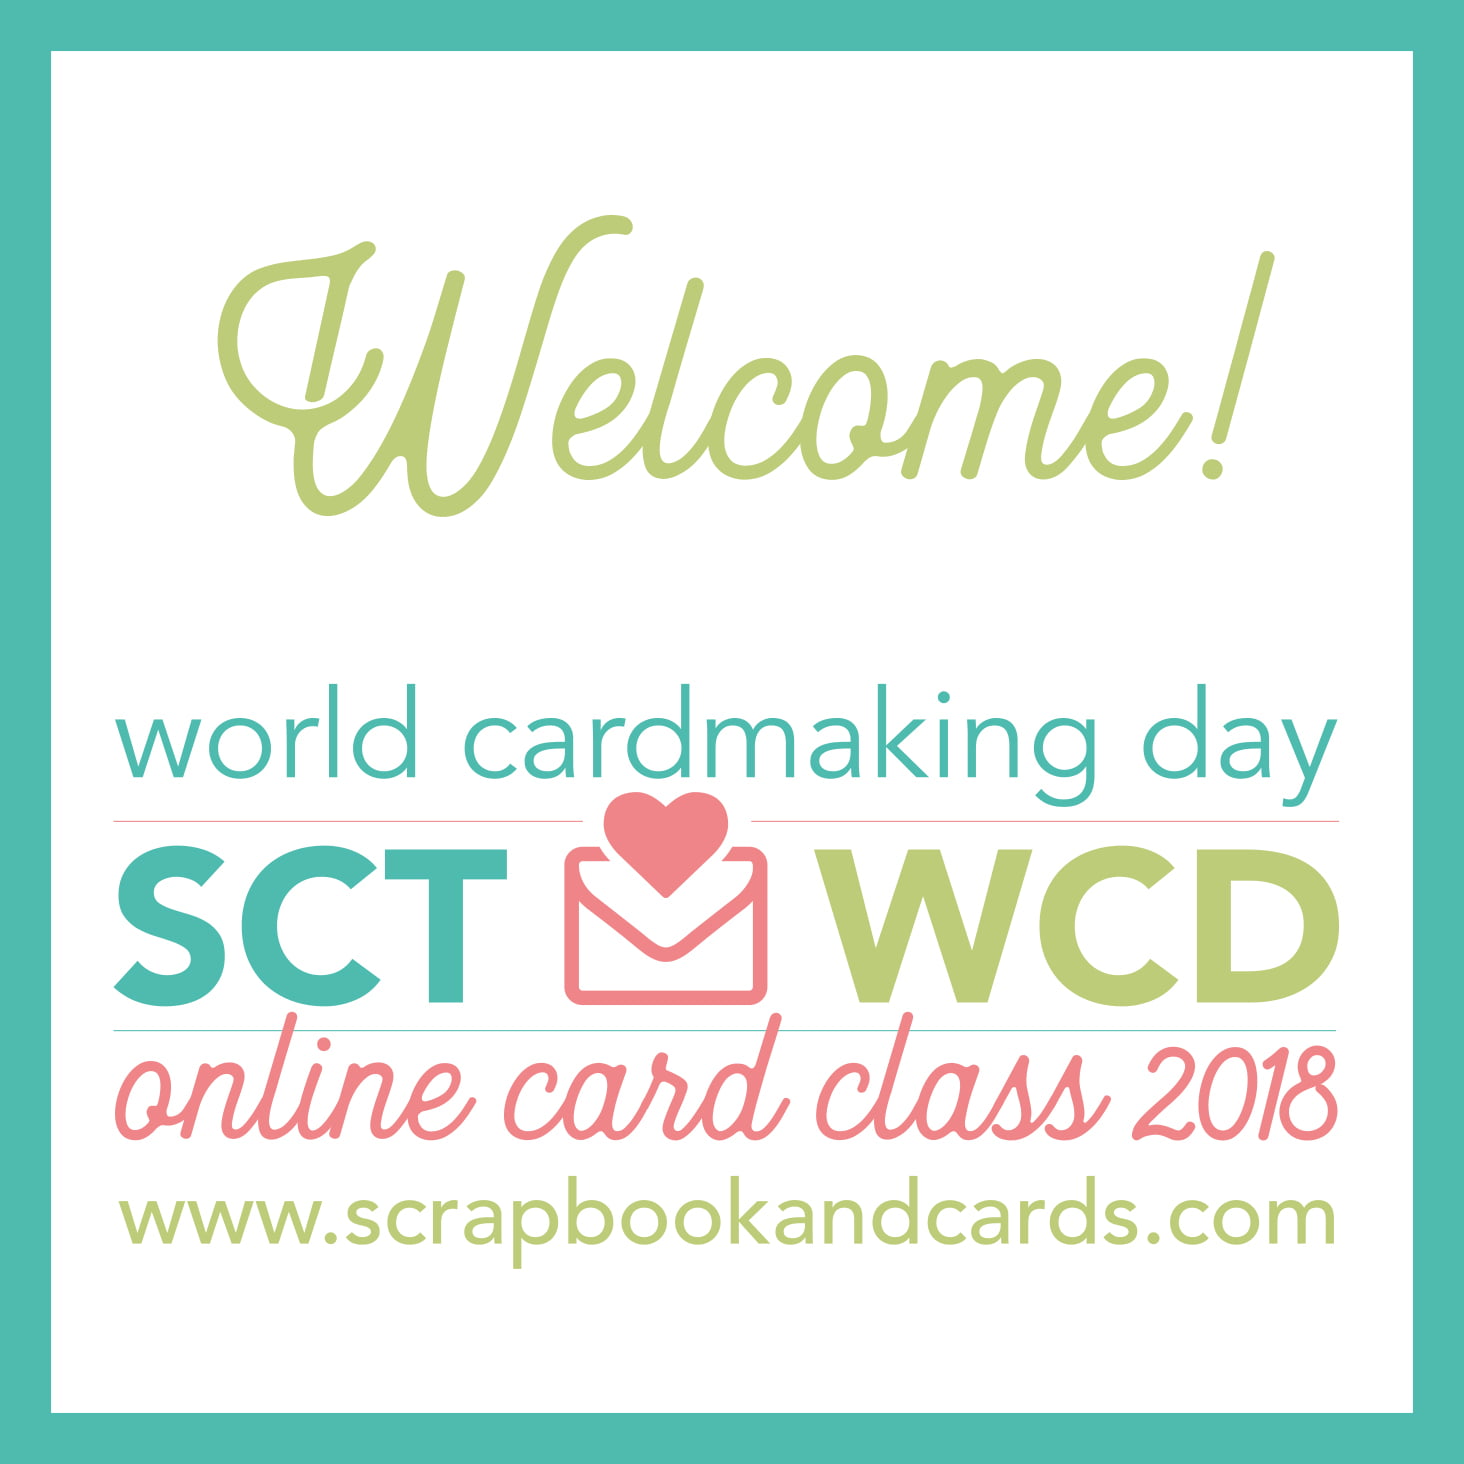 Welcome - World Card Making Day 2018